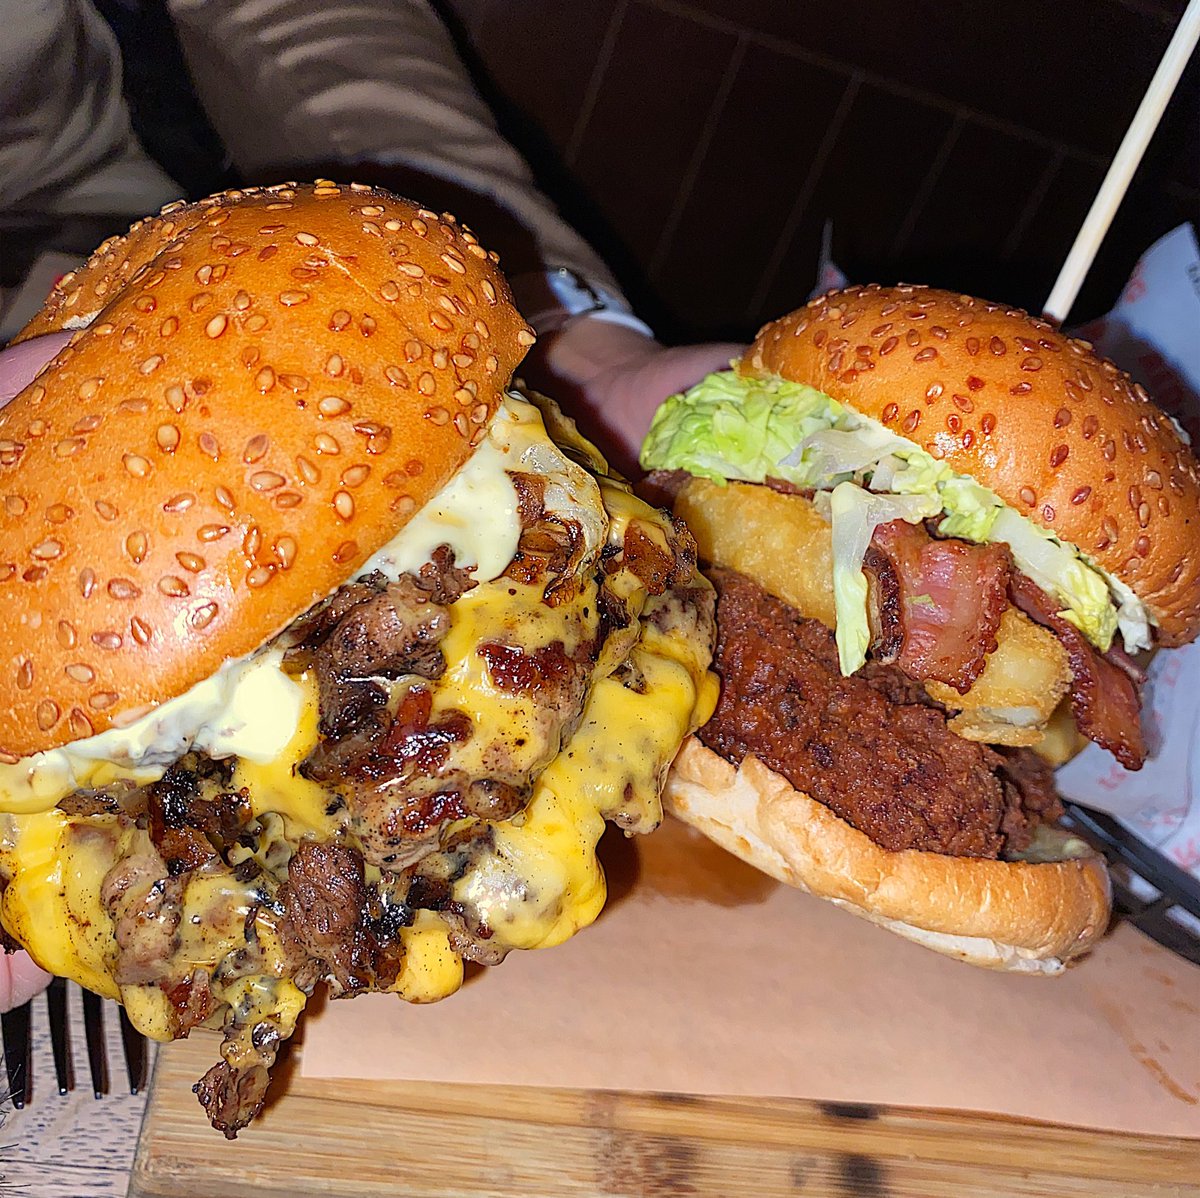 Even though January was supposed to be a 'healthy month' I couldn't resist a these burgers and I don't regret it one bit  want a cheat day? Try Red Dog Saloon 